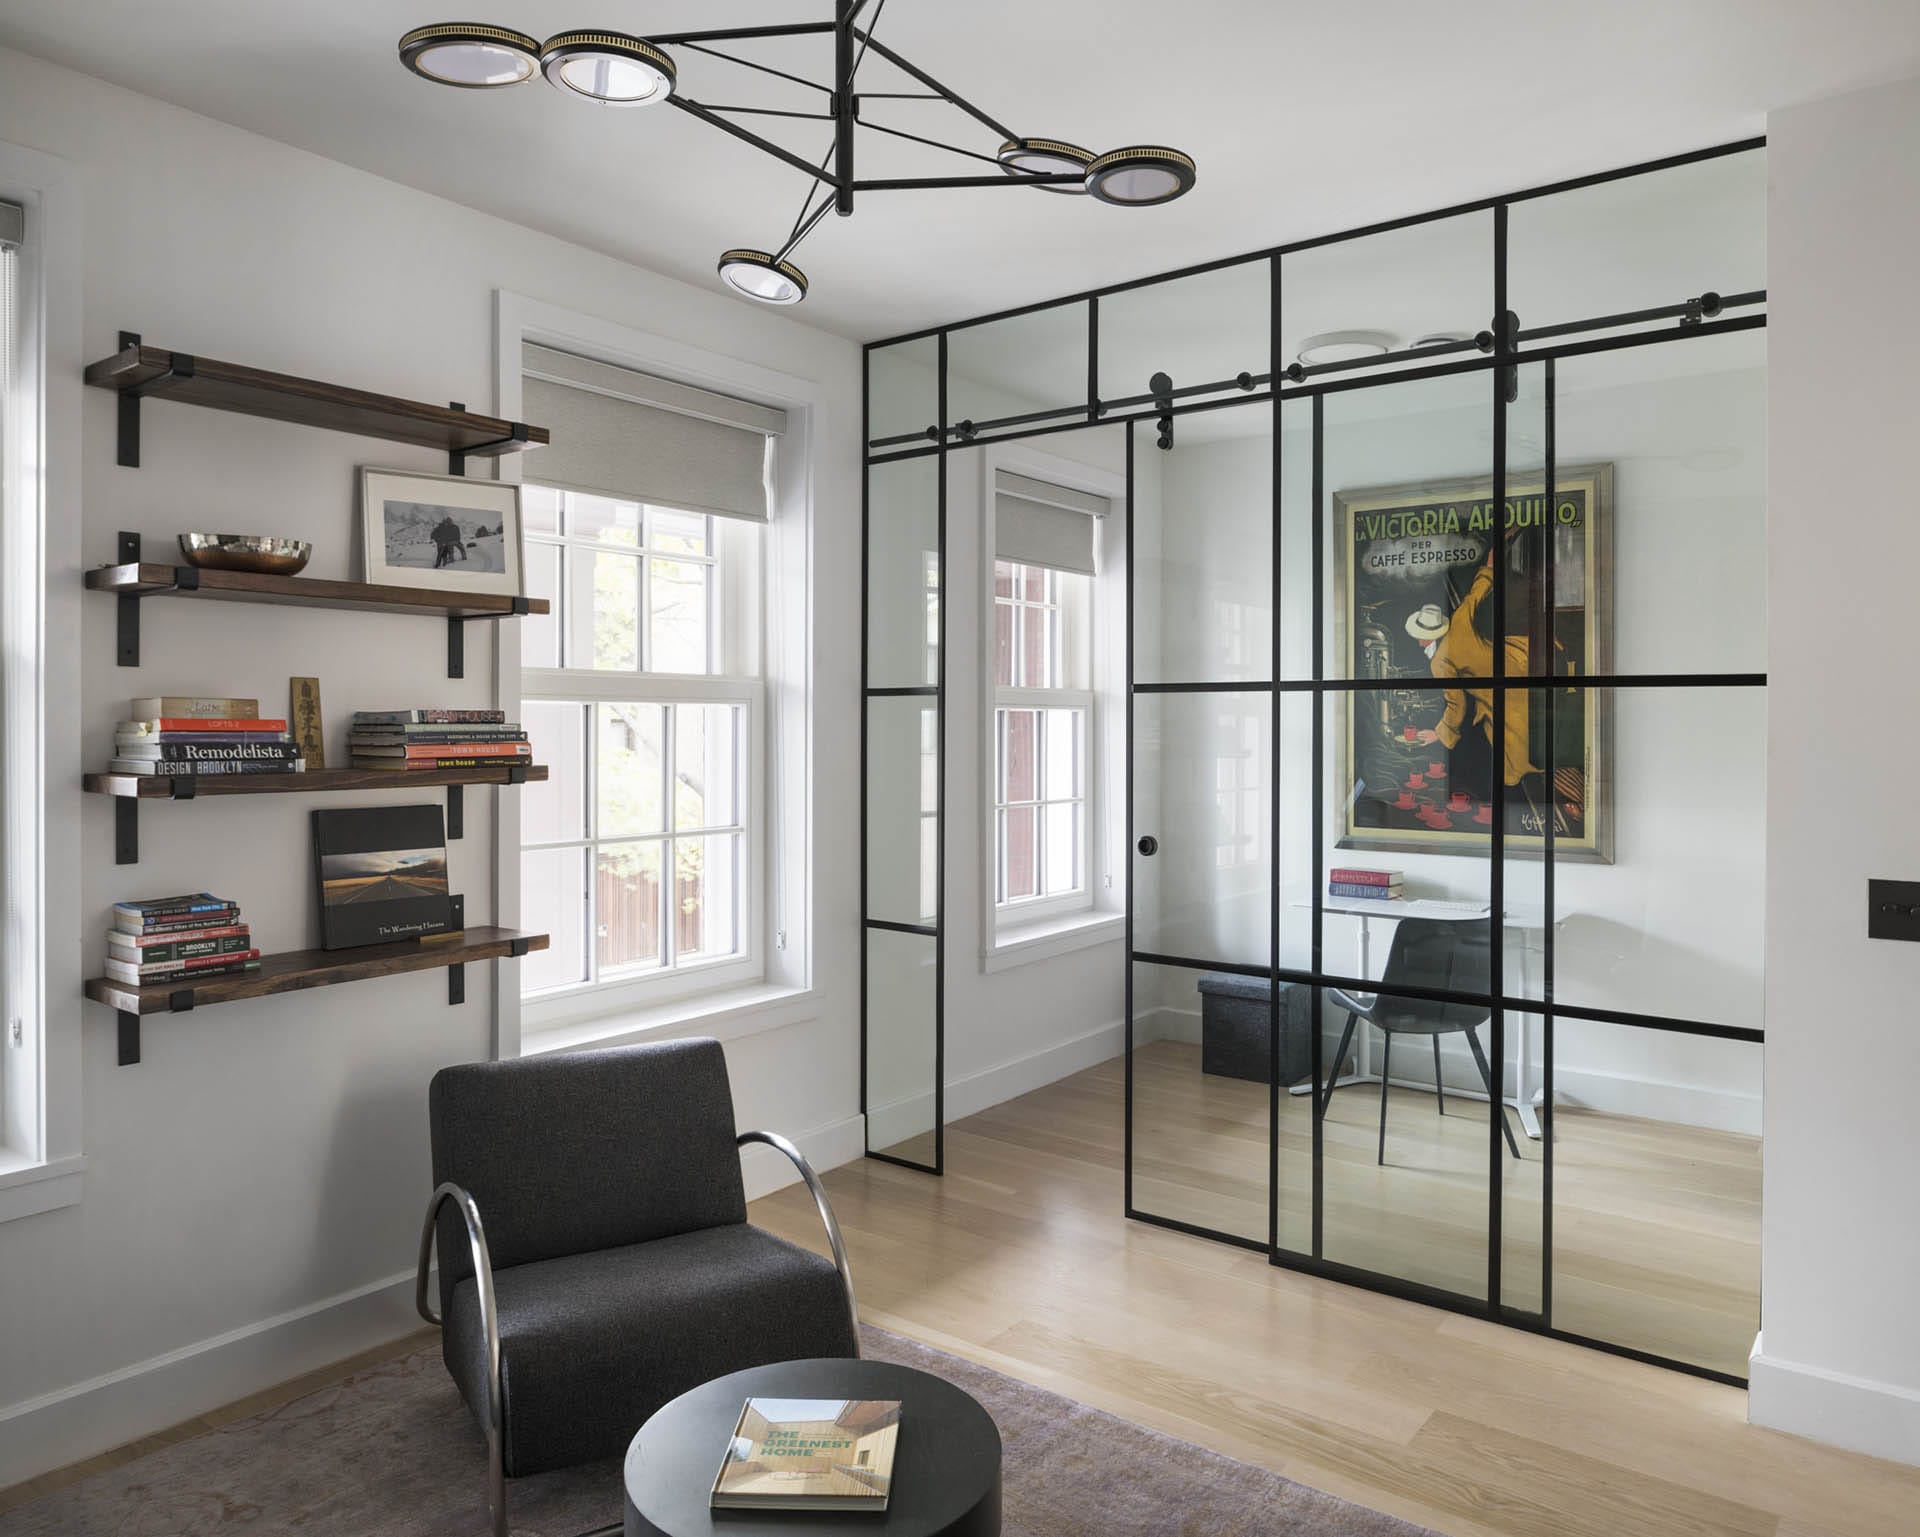 Study with modern light fixture and glass-and-metal privacy wall.